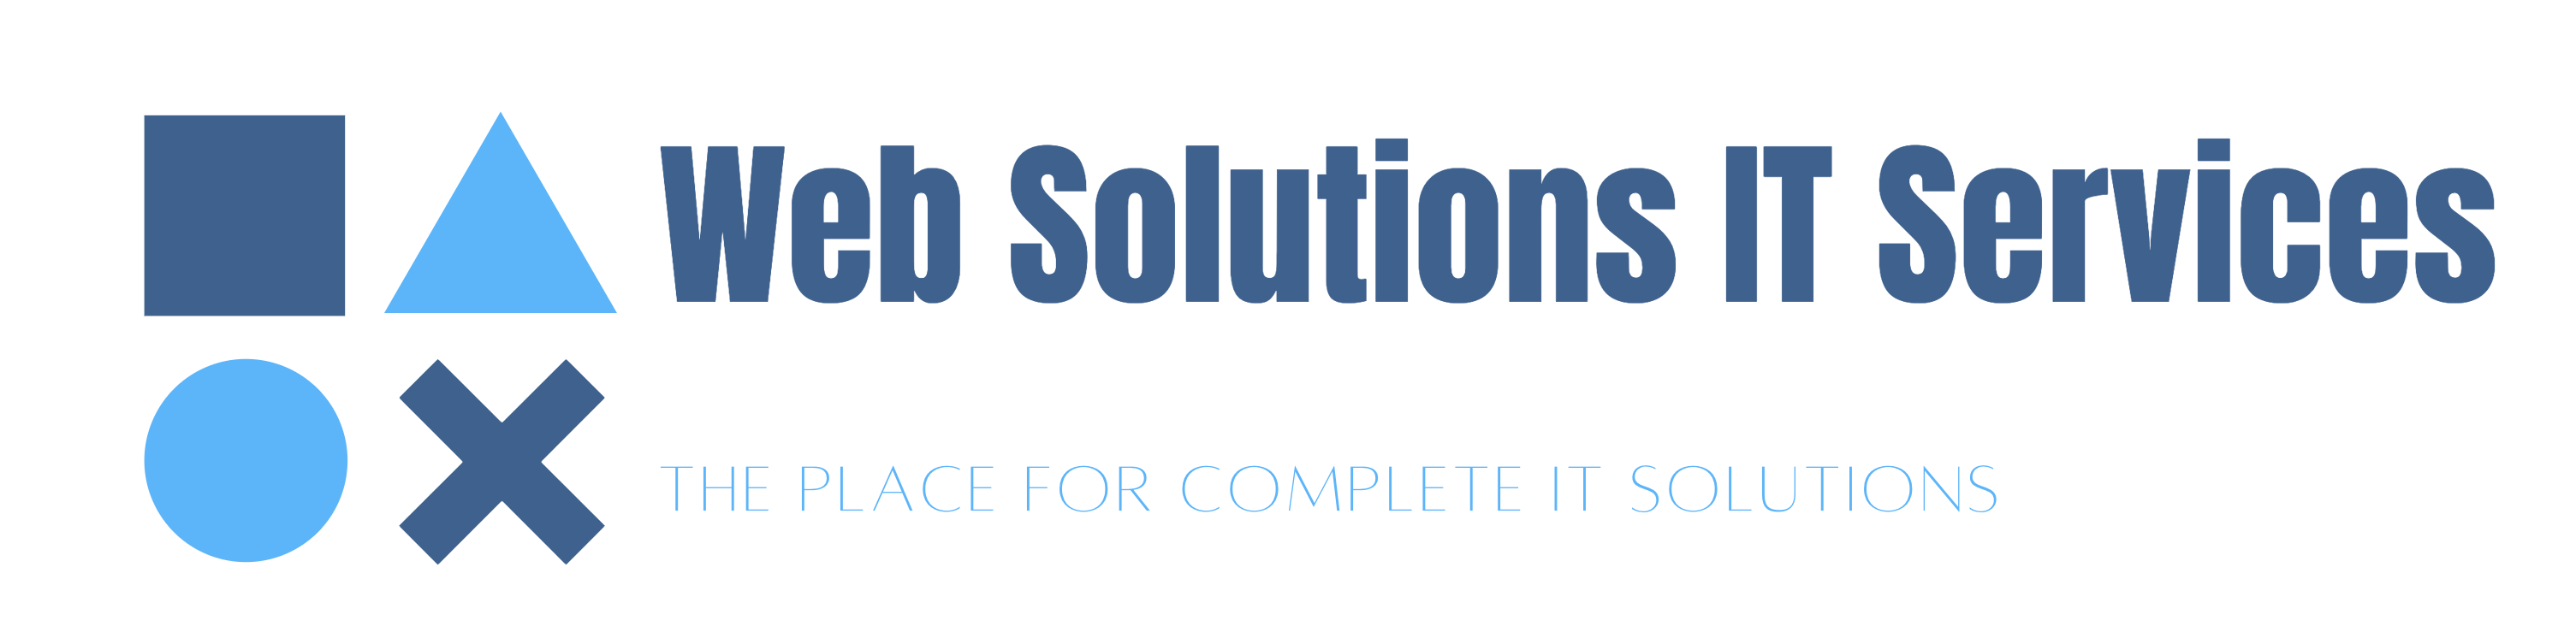 Web Solutions IT Services